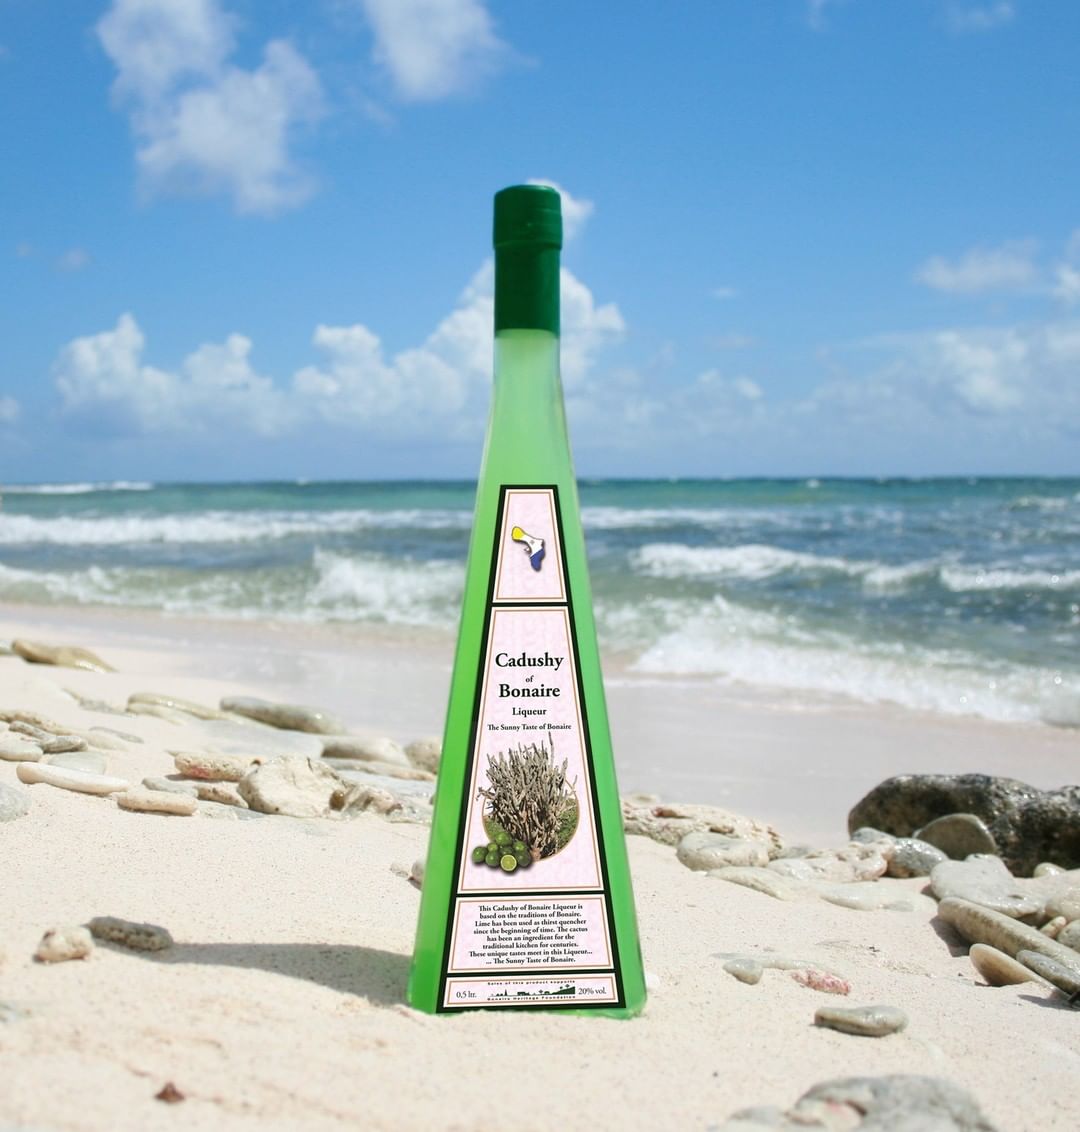 One of Bonaire Island’s most interesting offering is their cactus-based liqueur, like this island drink: Cadushy of Bonaire